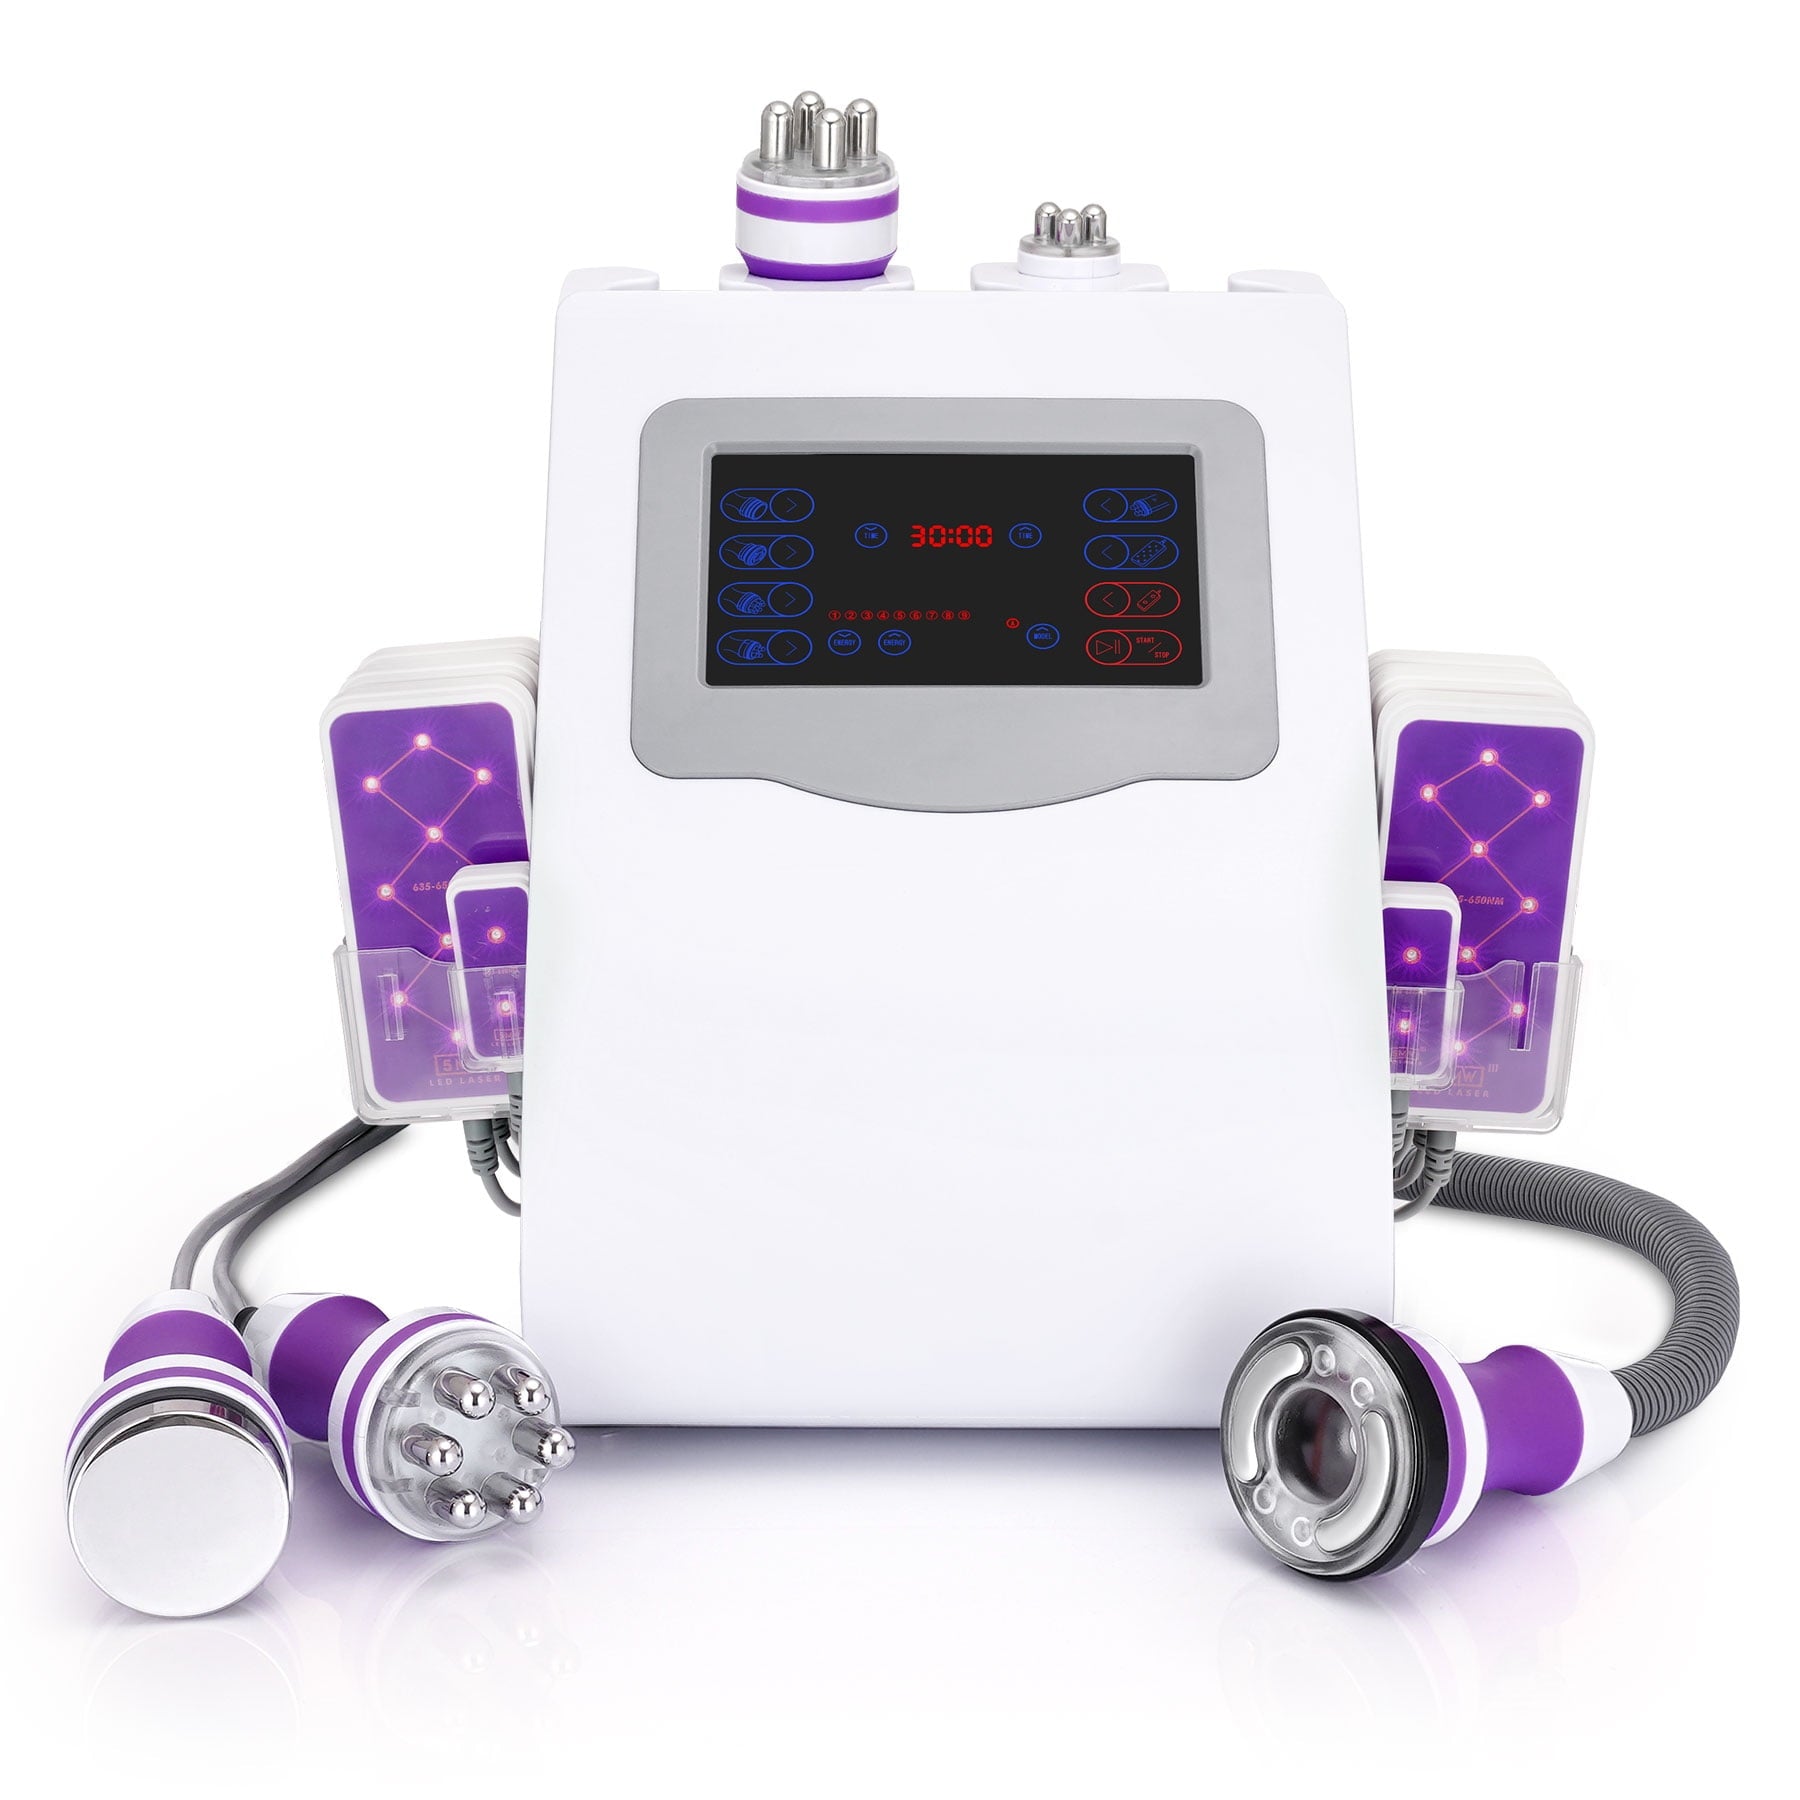 Suerbeaty 6in1 Vacuum Radio Frequency Slimming Cellulite Body Massage Machine For Home Spa Use